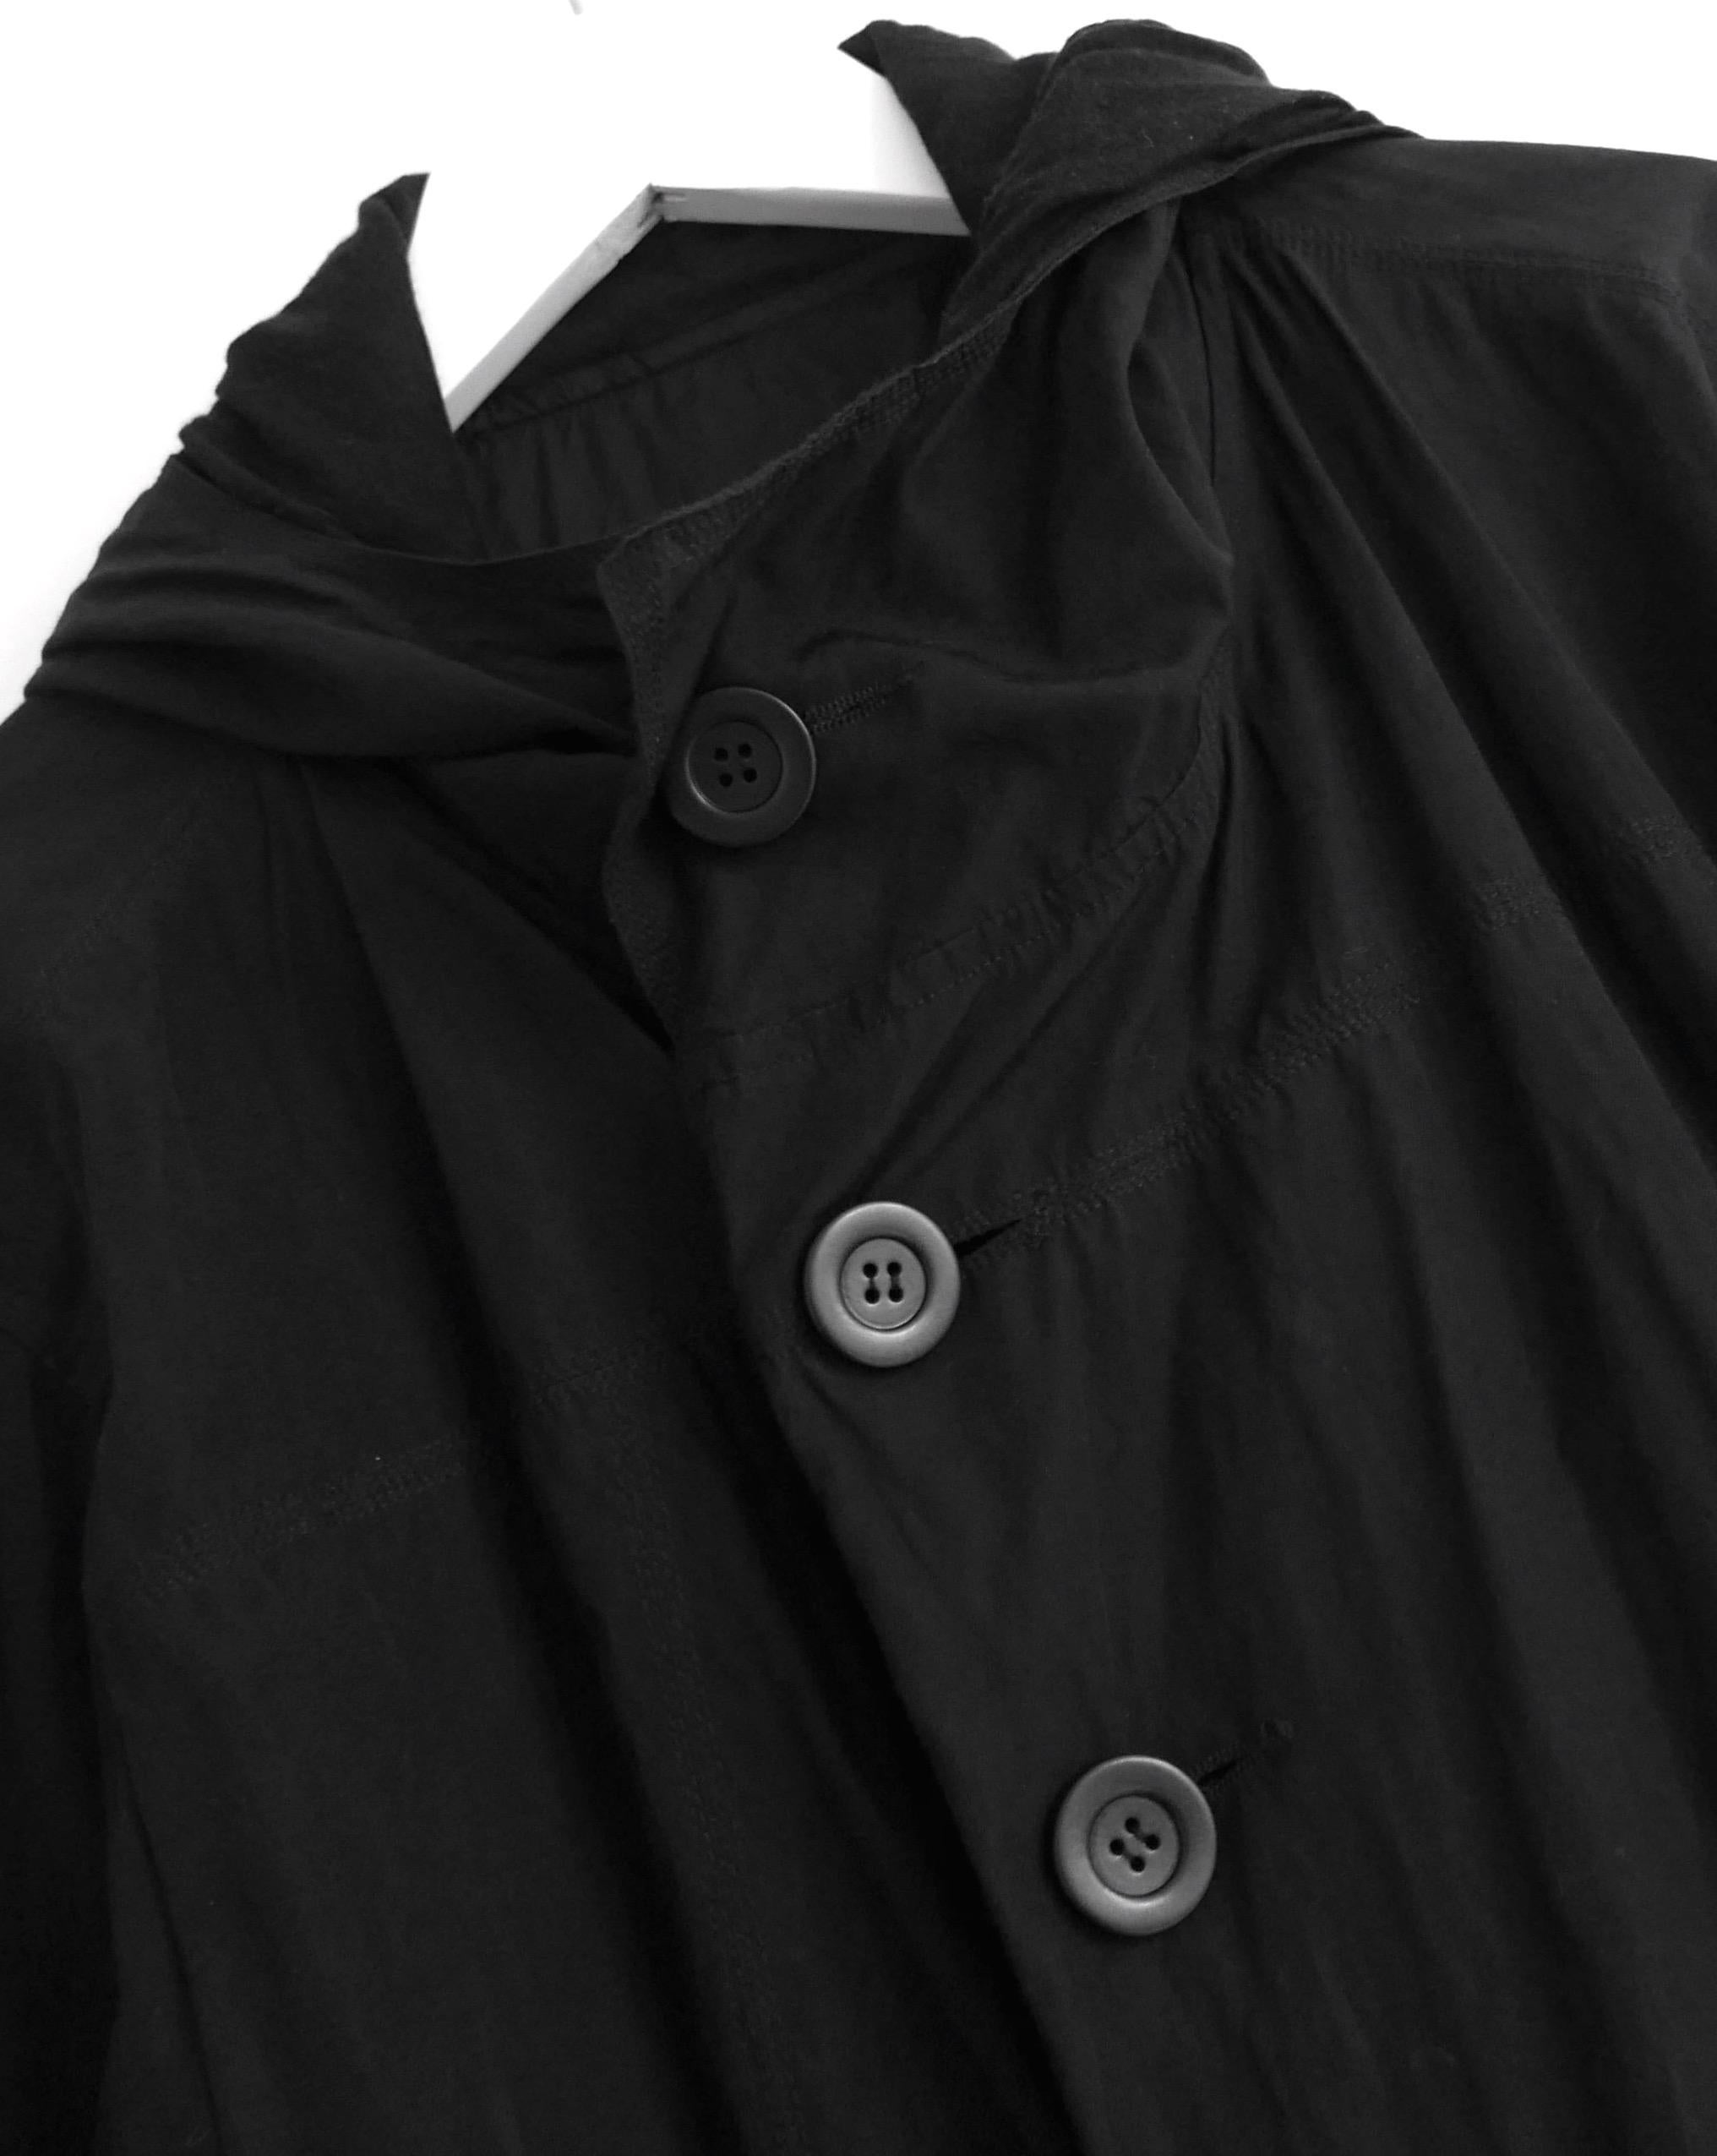 Rick Owens SS08 Creatch Black Coat In New Condition For Sale In London, GB